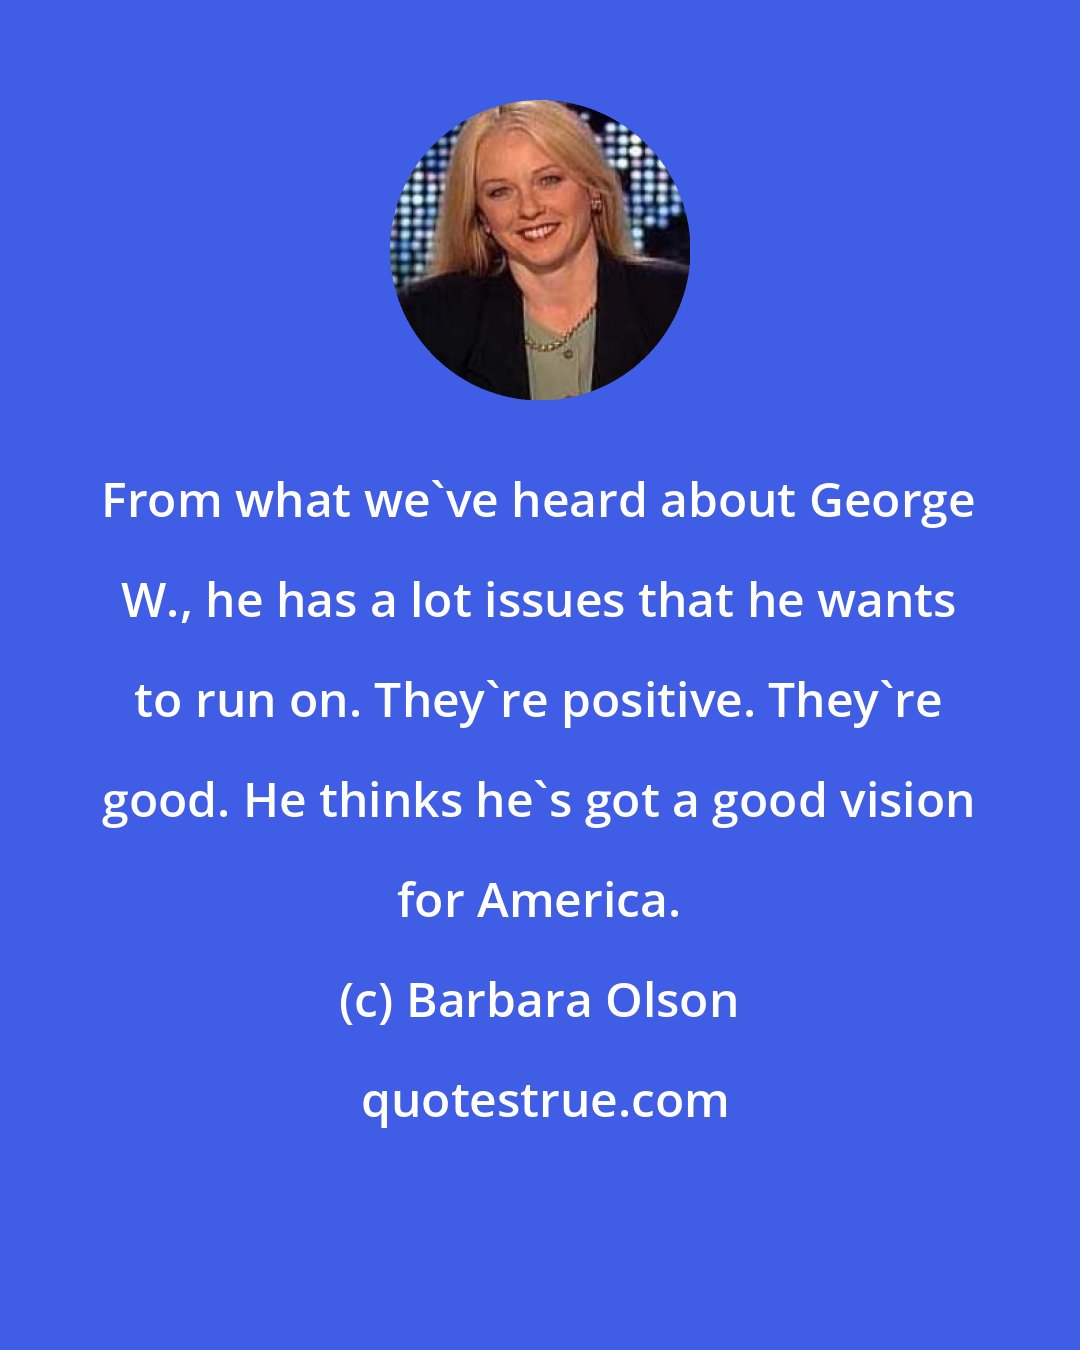 Barbara Olson: From what we've heard about George W., he has a lot issues that he wants to run on. They're positive. They're good. He thinks he's got a good vision for America.